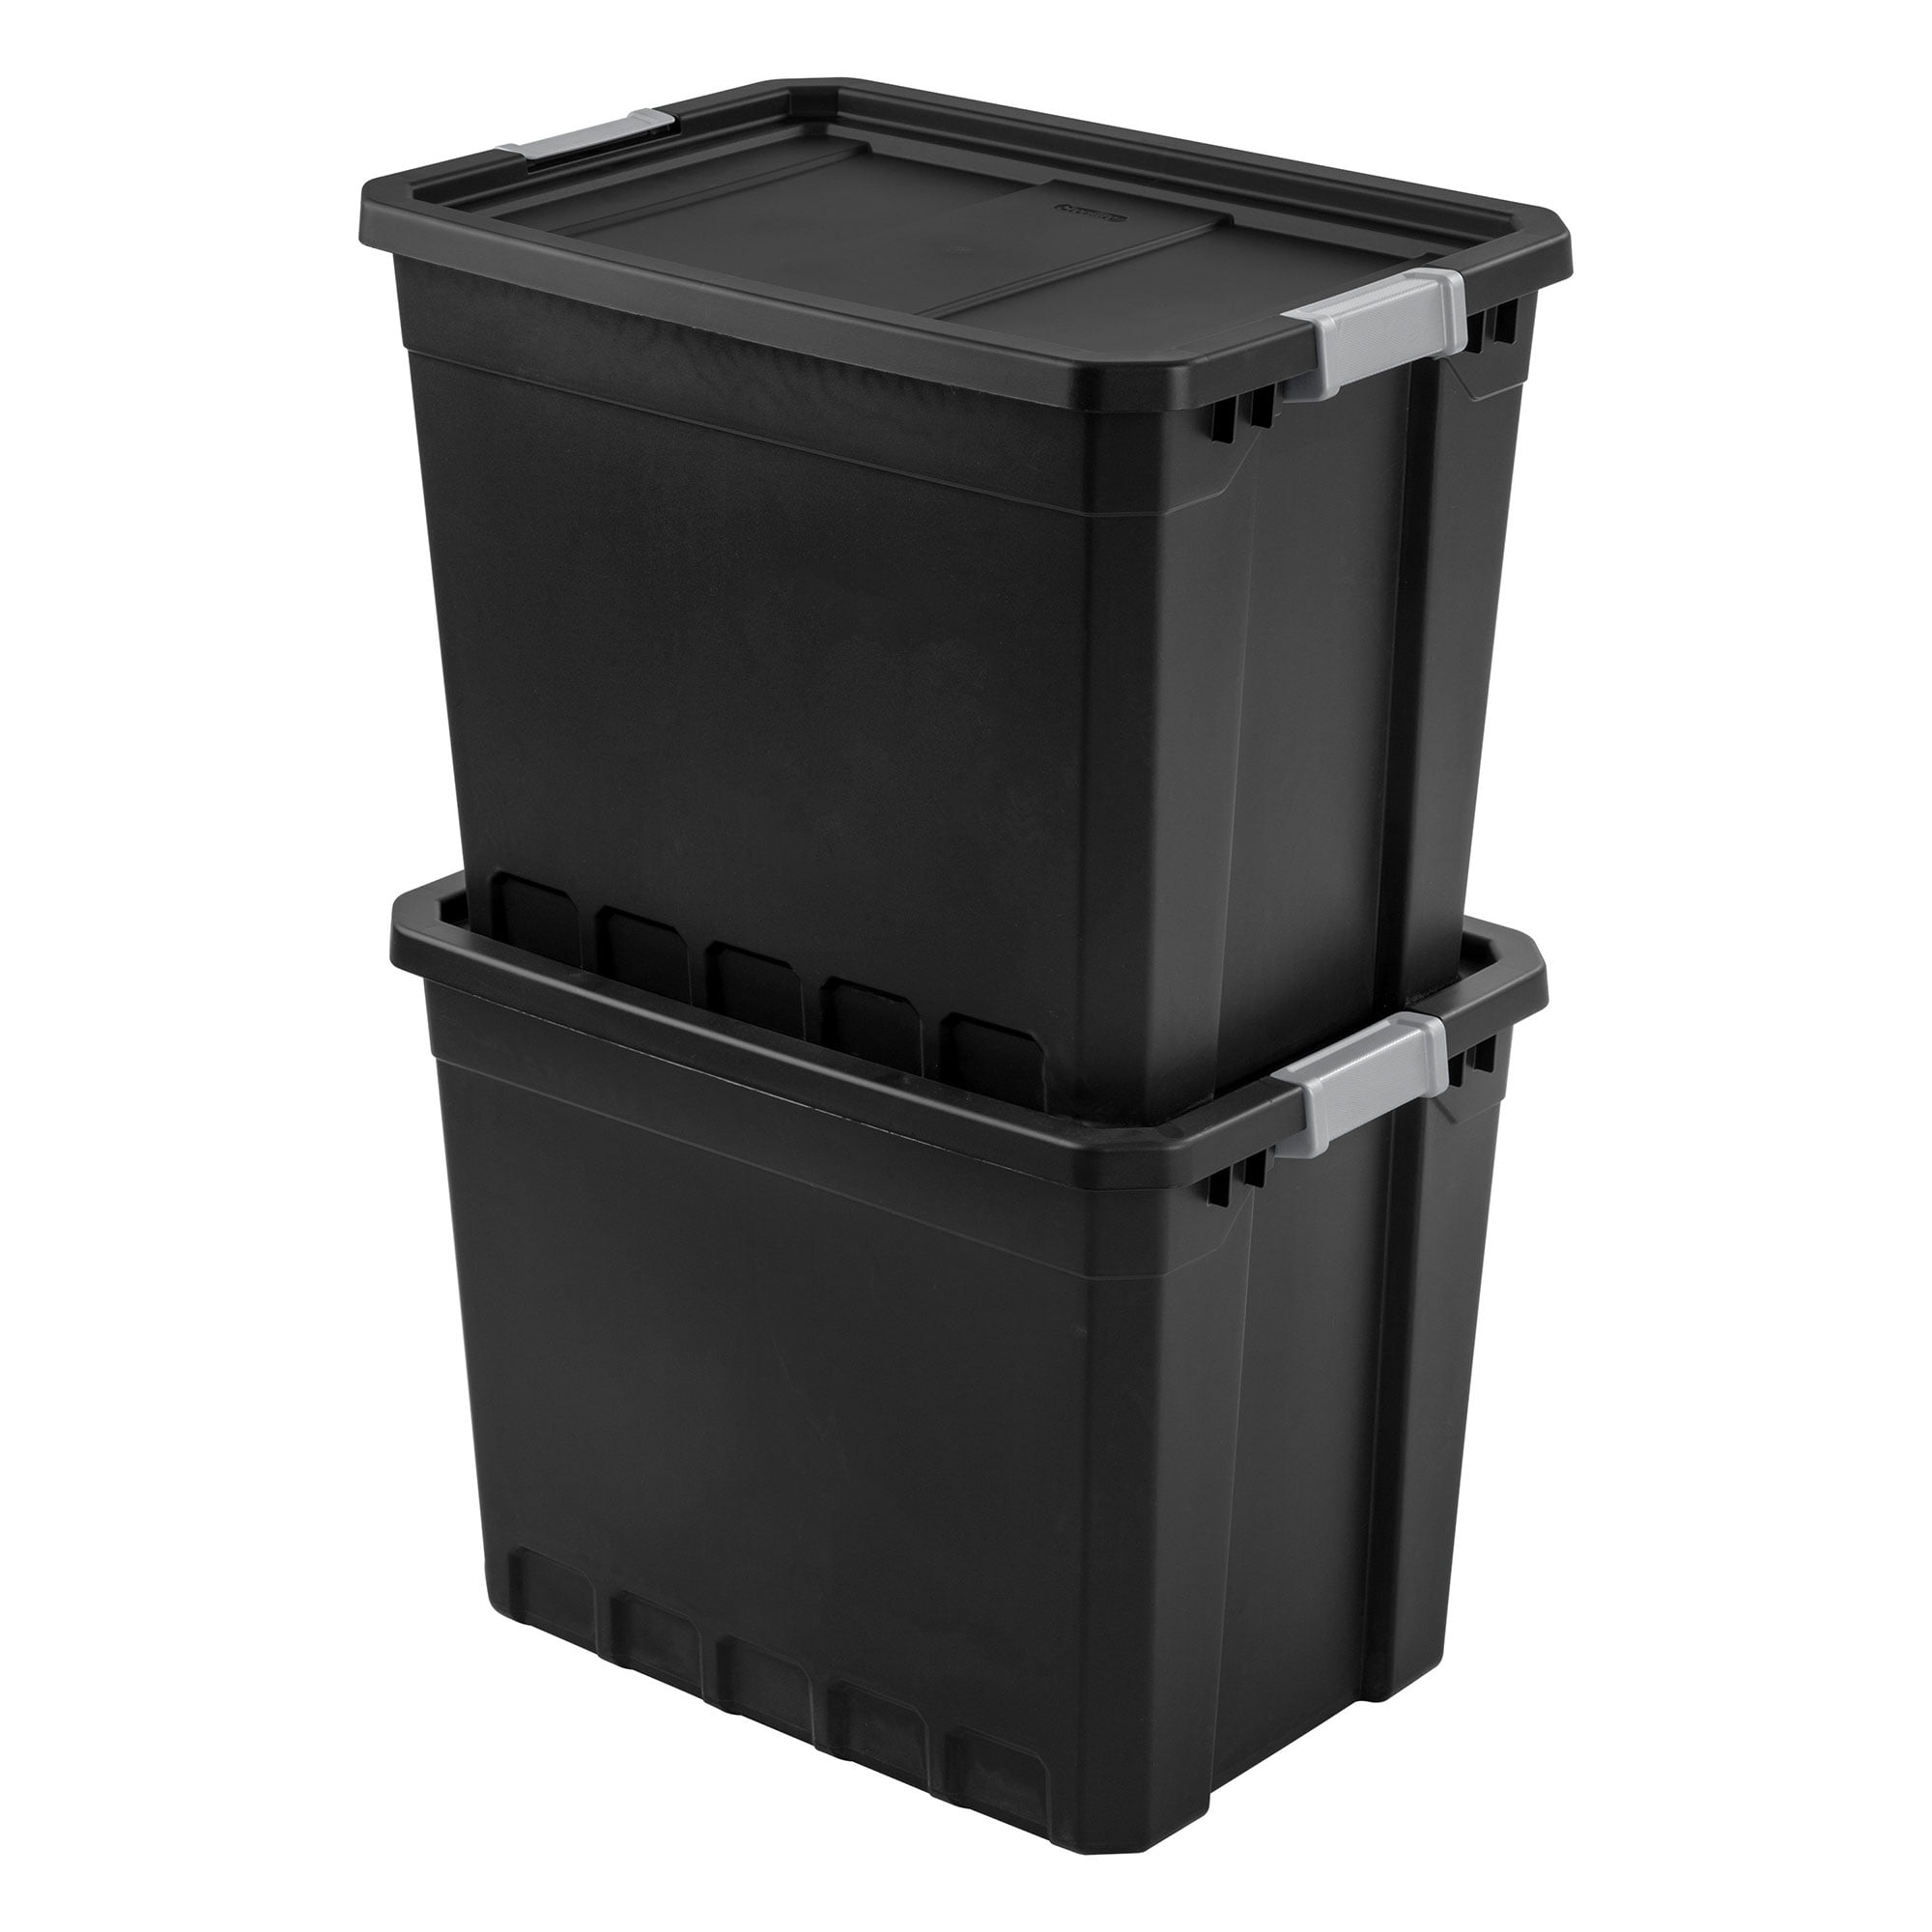 STORAGE CONTAINERS Heavy Duty with Lid 7-27 Gallon Sizes Available